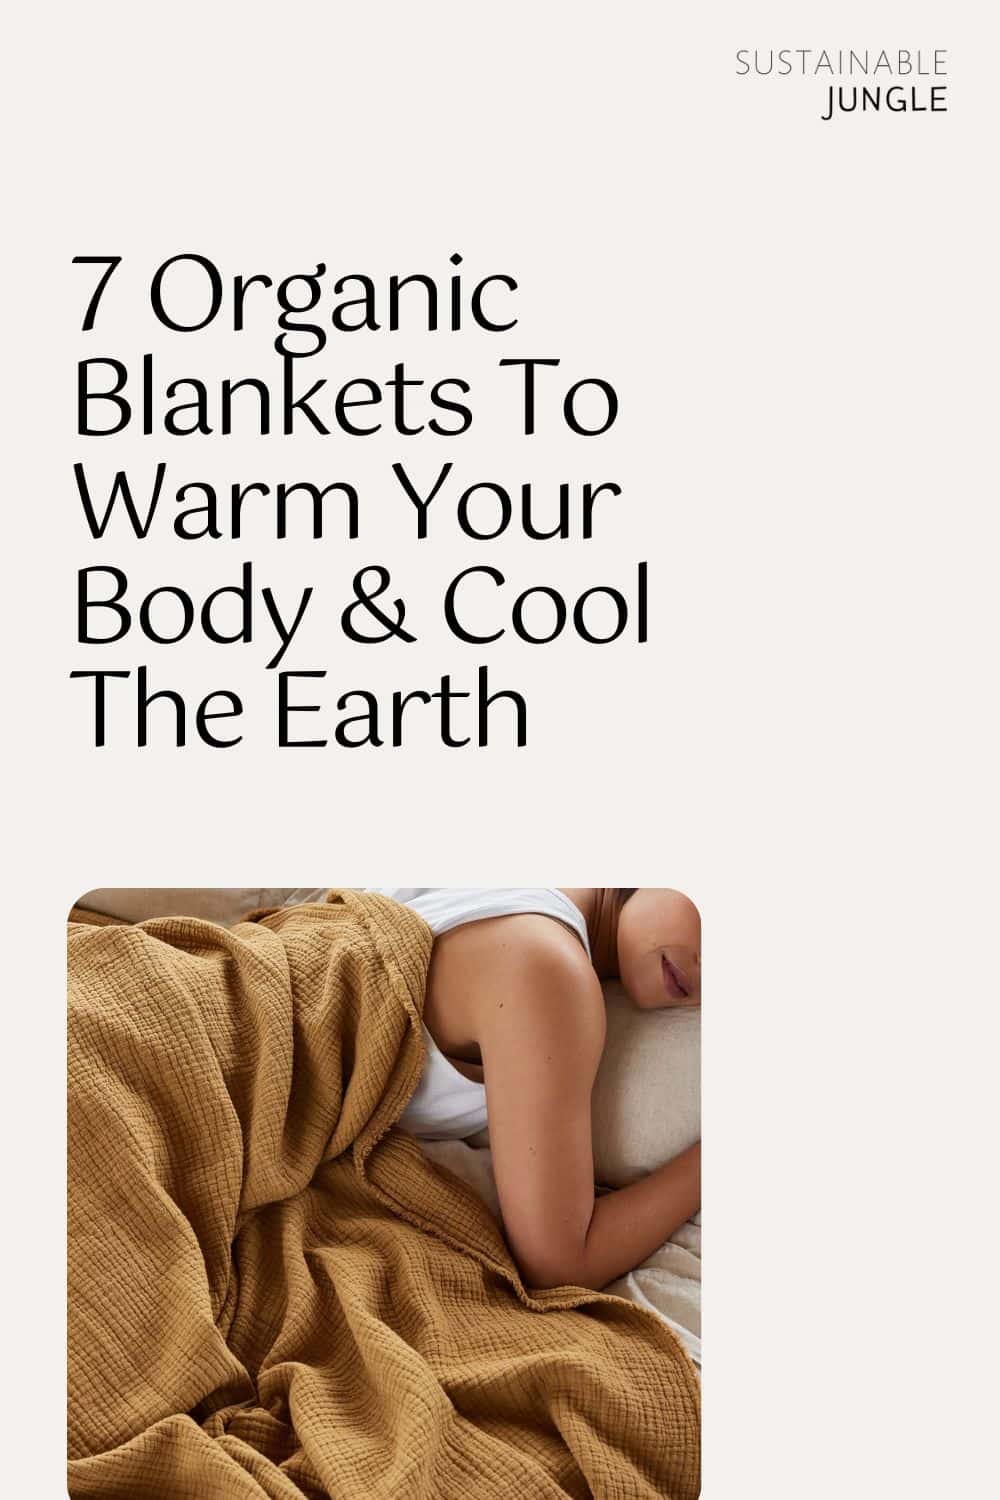 7 Organic Blankets To Warm Your Body & Cool The Earth Image by Coyuchi #organicblankets #organiccottonblankets #bestorganicblanket #organicthrowblankets #organiccottonthrows #naturalblankets #sustainablejungle